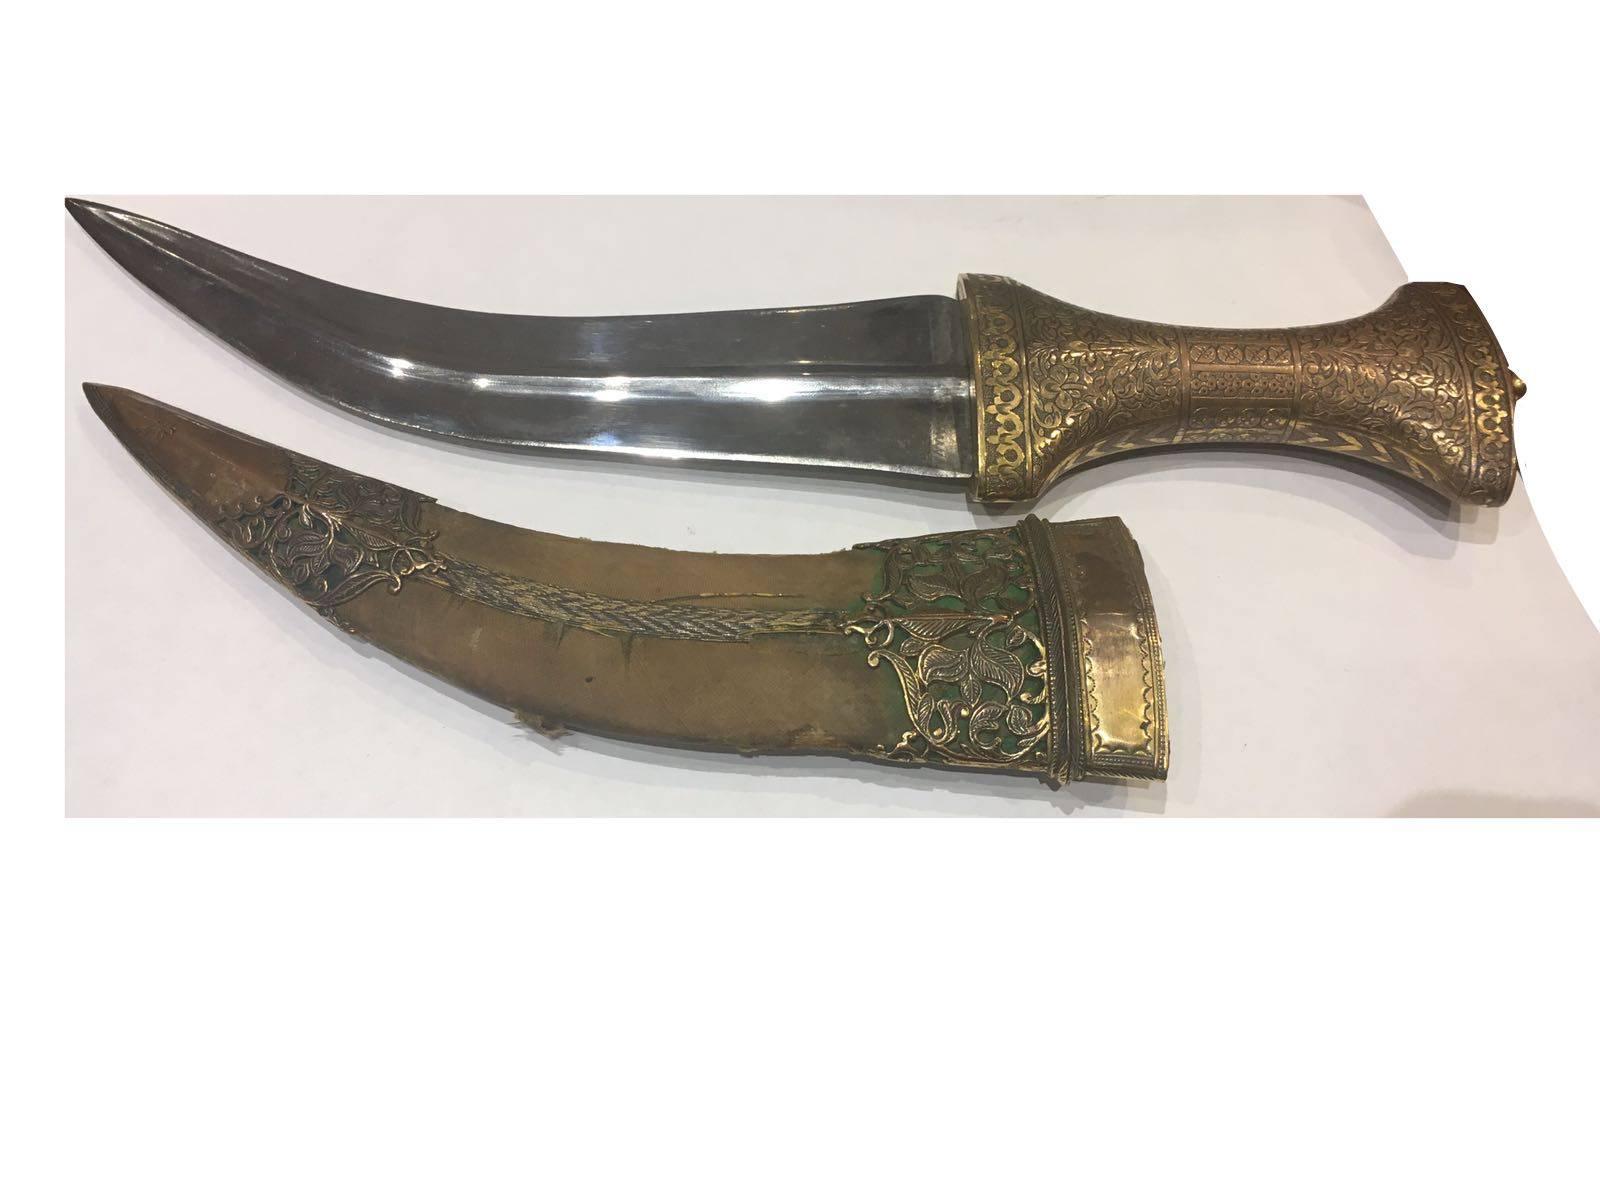 19th century, Hindu/Persian dagger, made from steel and bronze.